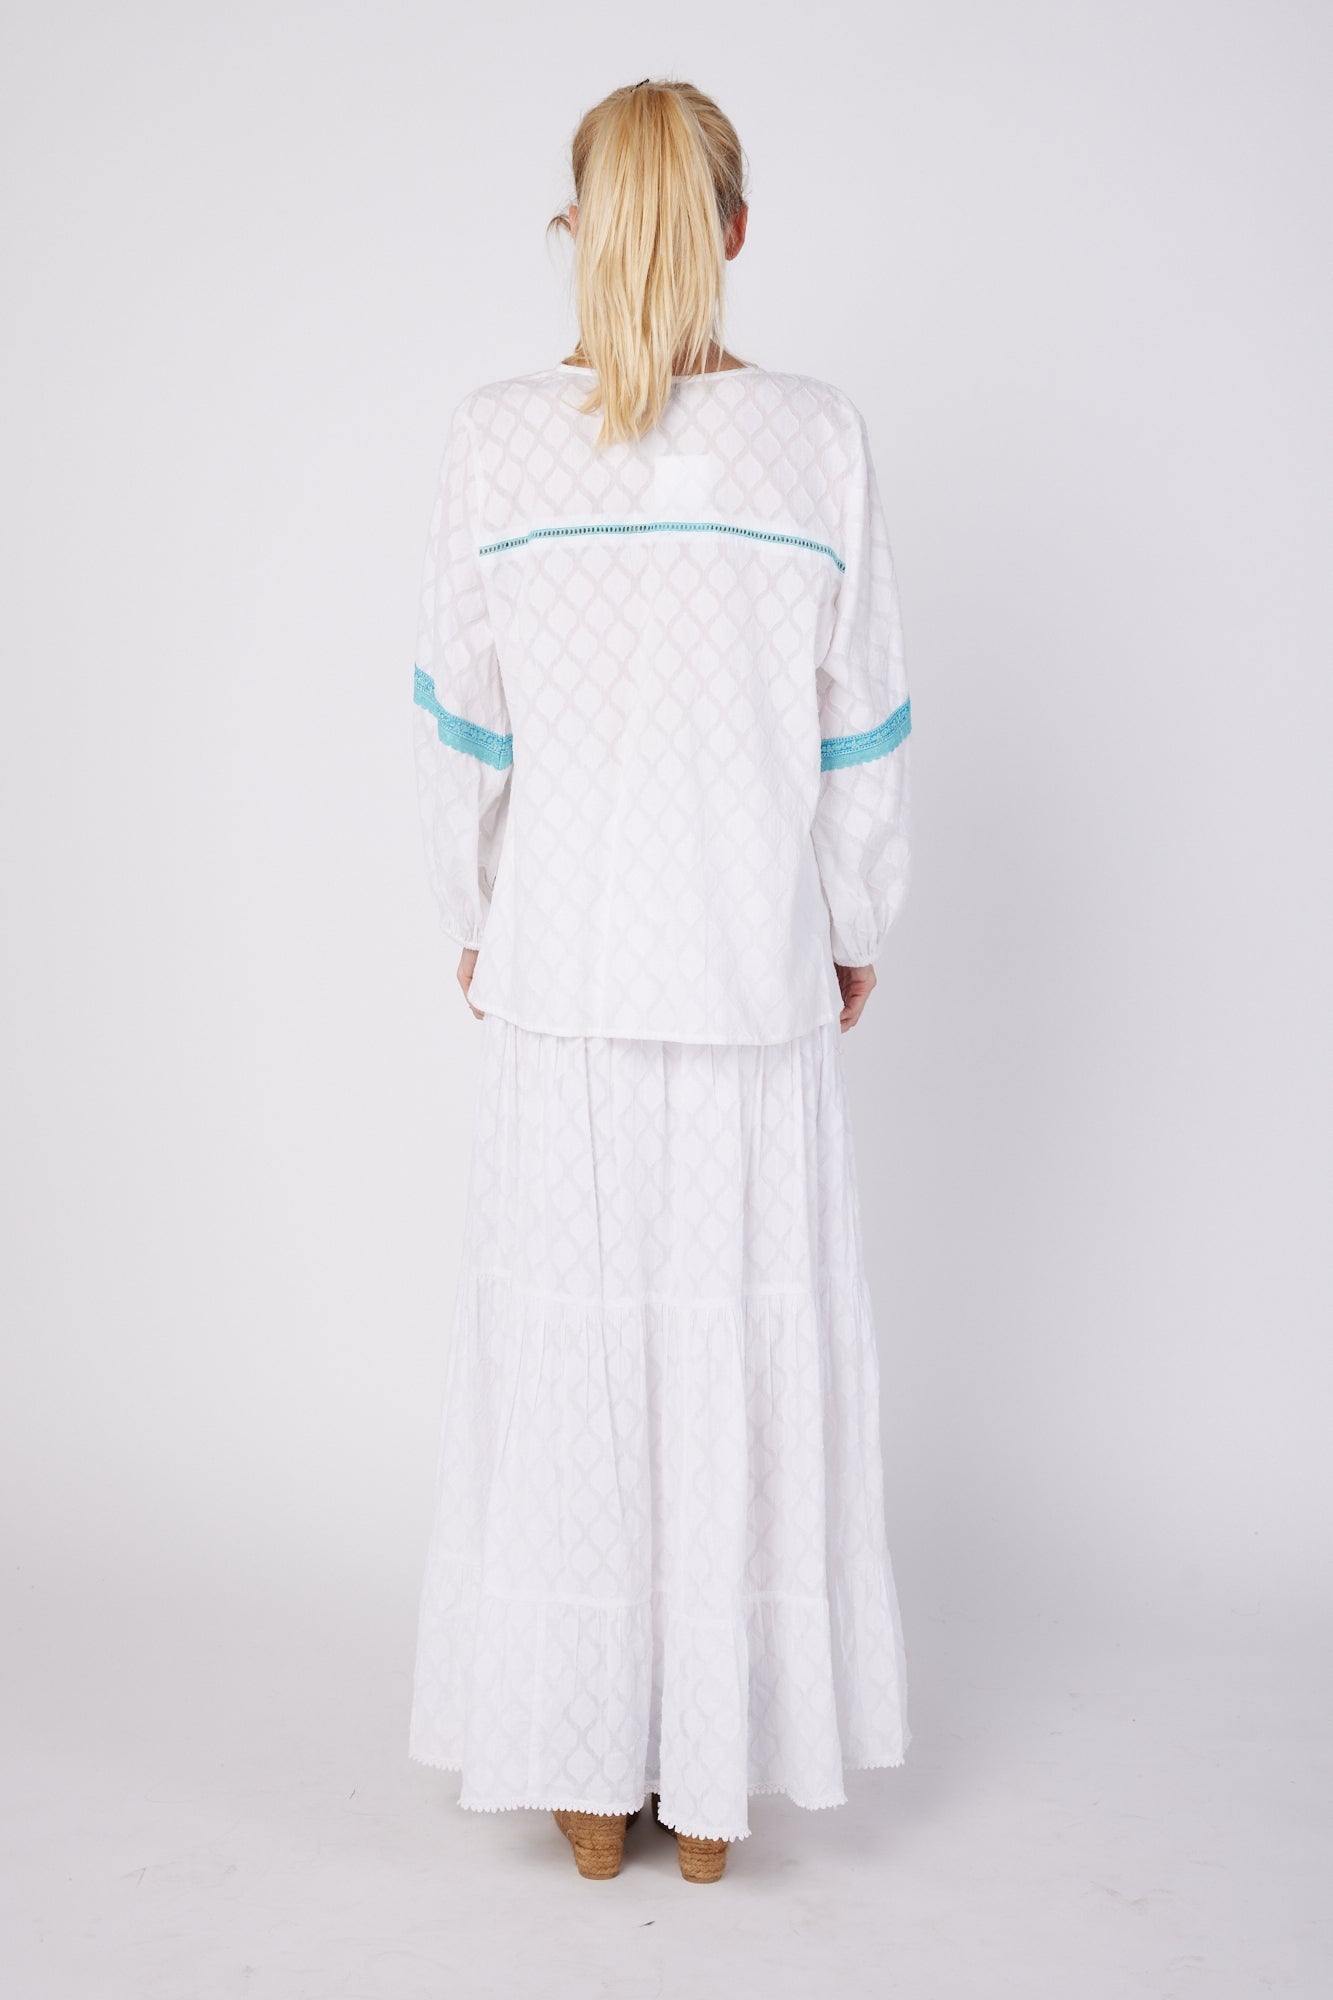 ModaPosa Leola Puff Sleeve Tassel Blouse with Lace Trim in White . Discover women's resort dresses and lifestyle clothing inspired by the Mediterranean. Free worldwide shipping available!